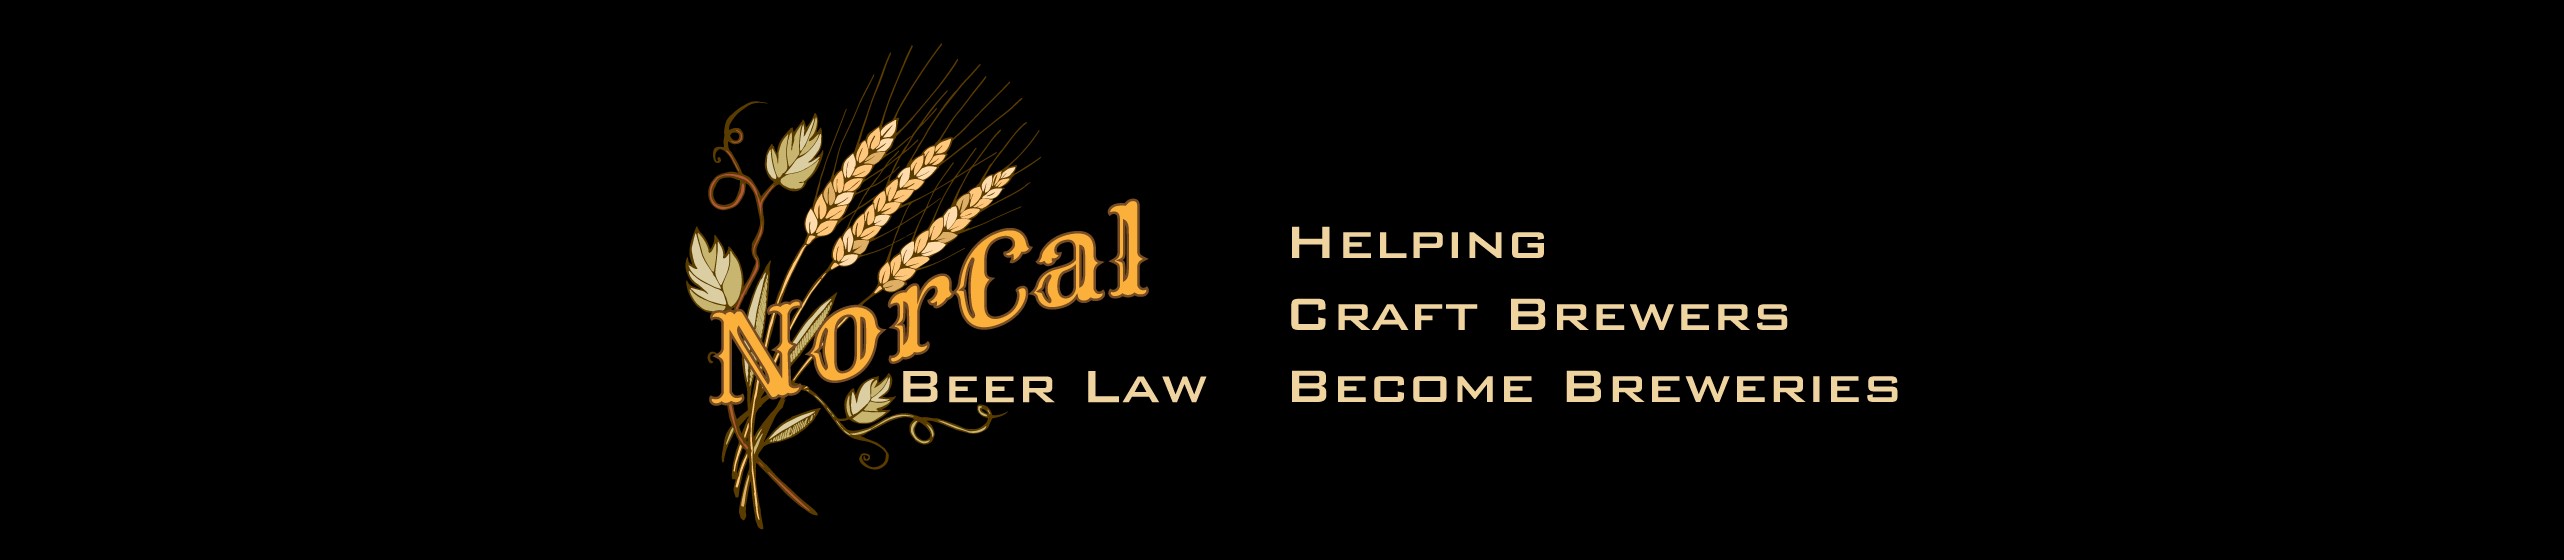 NorCal Beer Law